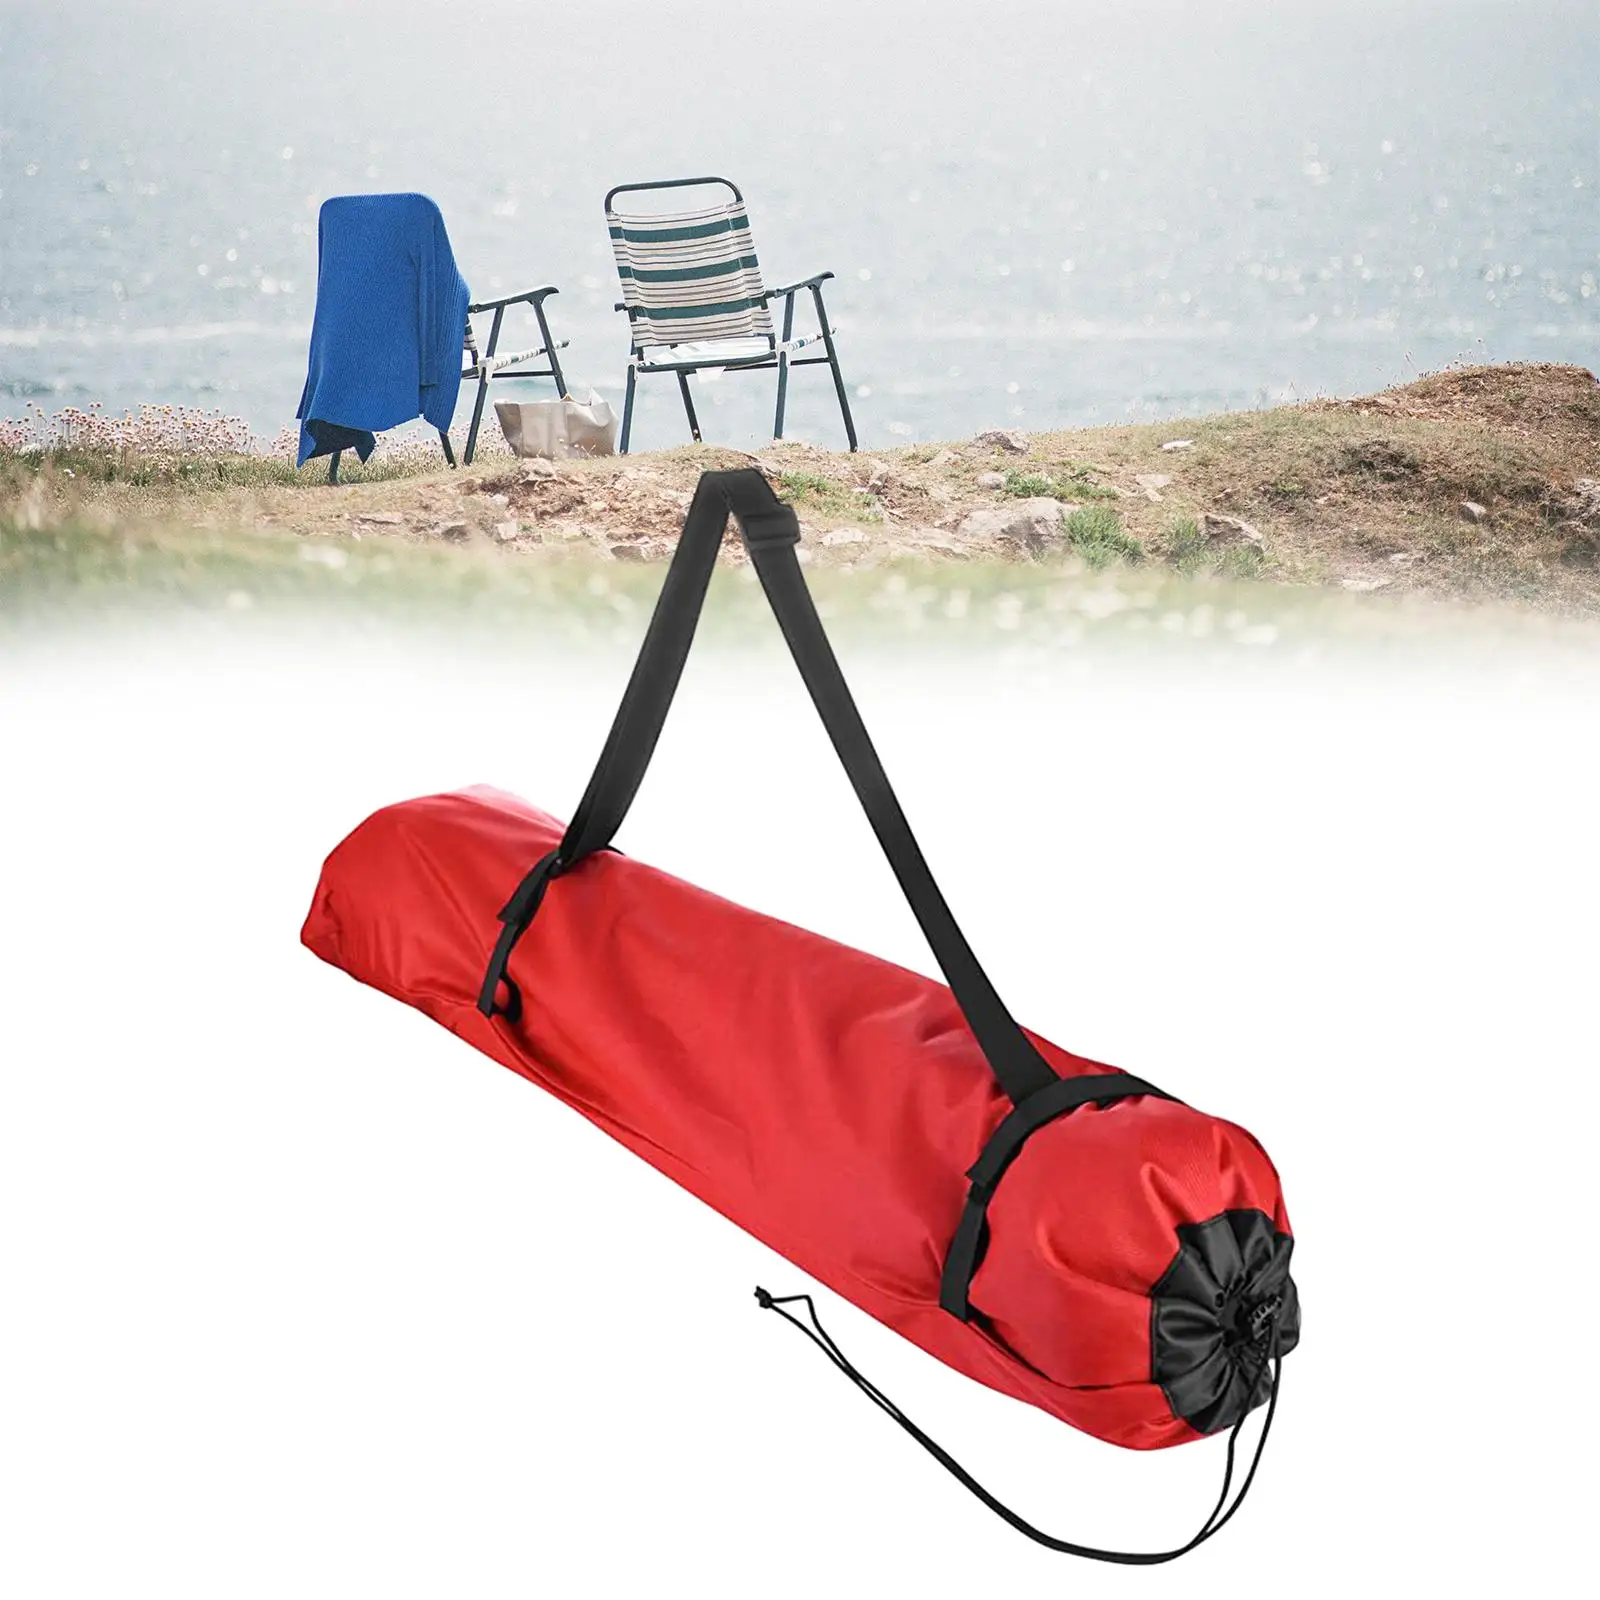 Camping Chair Bag, Moon Chair Storage Bag Large Capacity Folding Chair Carry Bag for Home Outdoor Backpacking Picnic Fishing